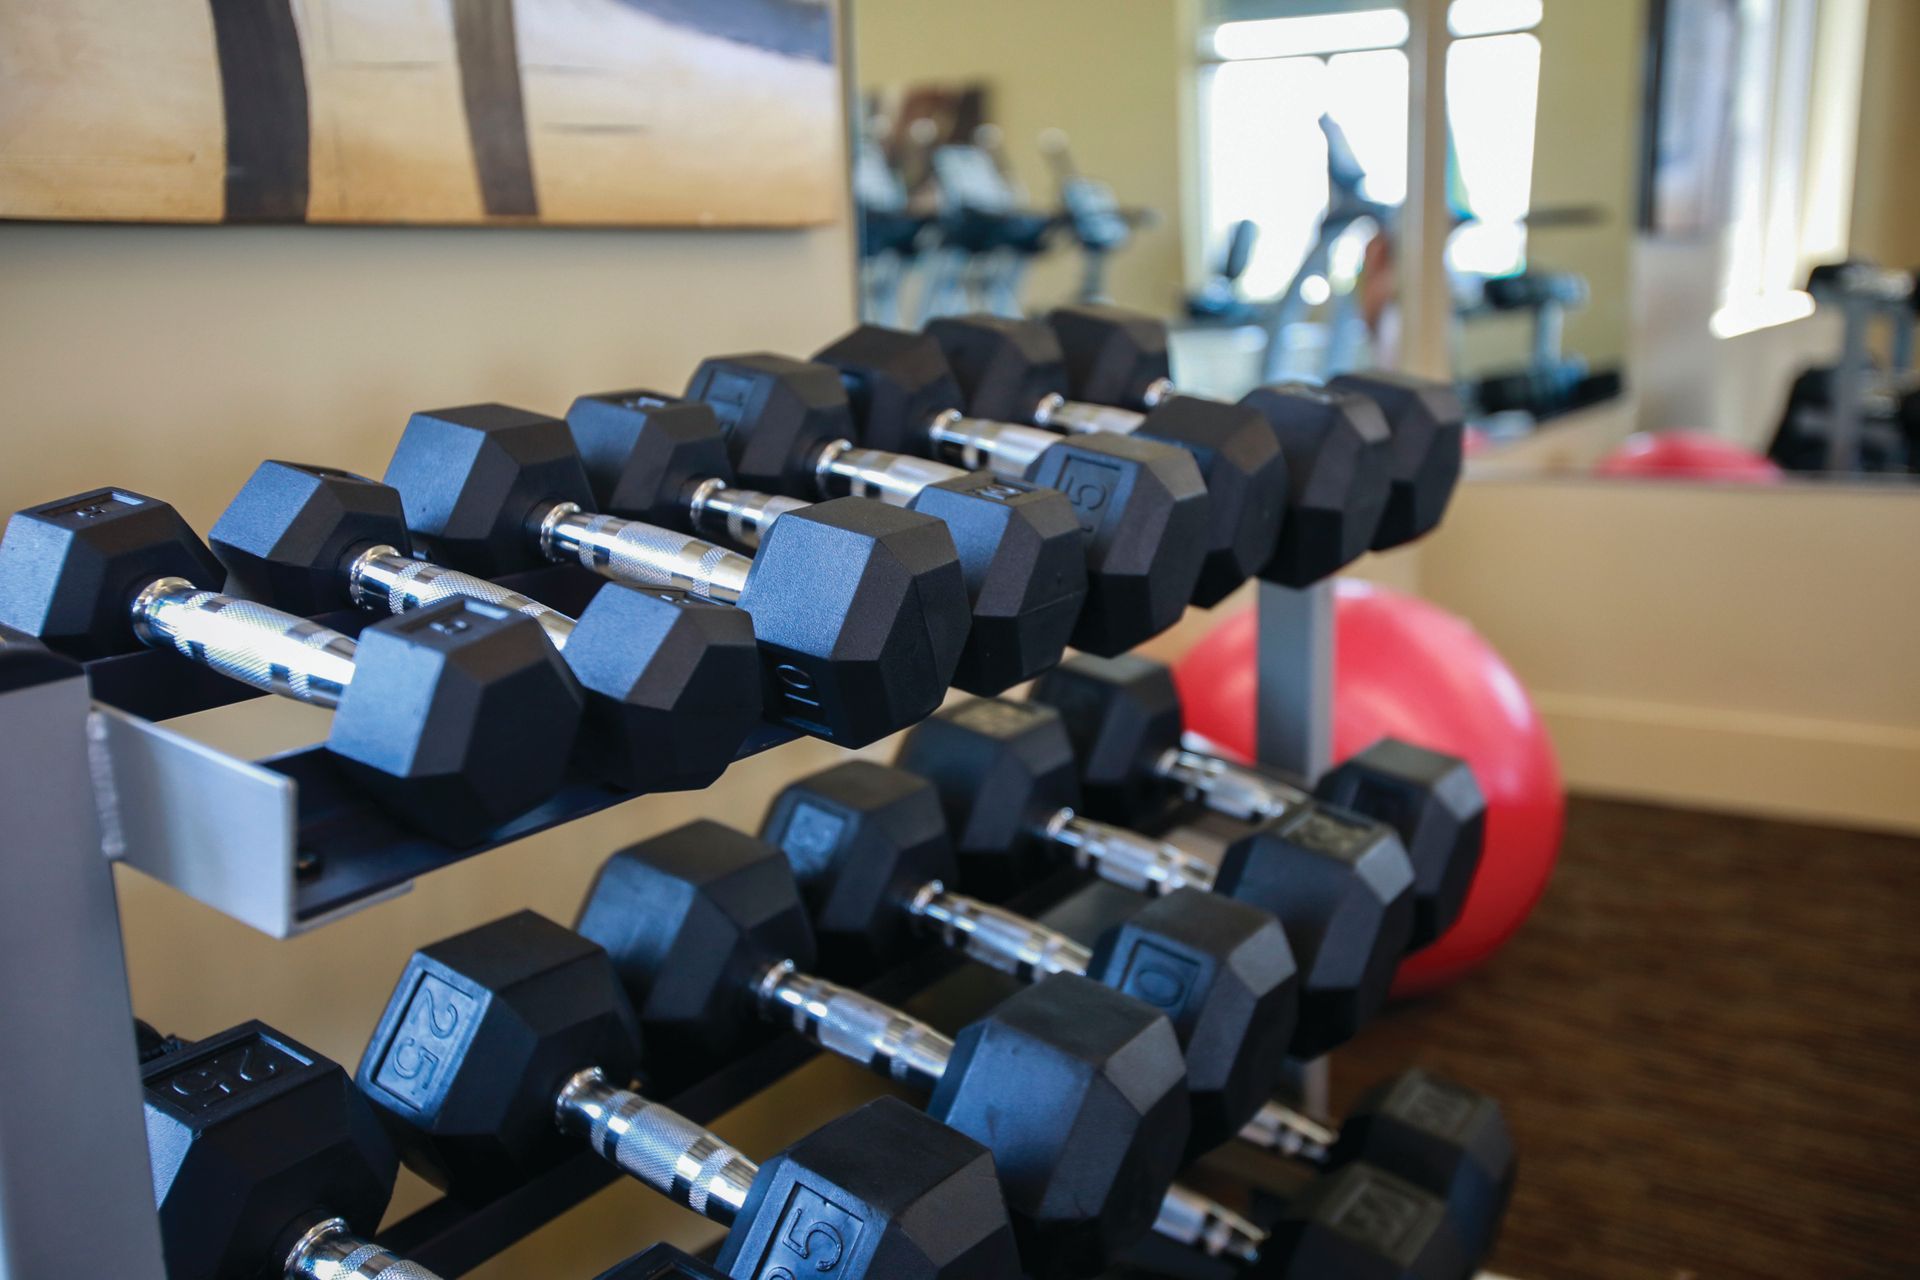 A bunch of dumbbells are stacked on top of each other in a gym.